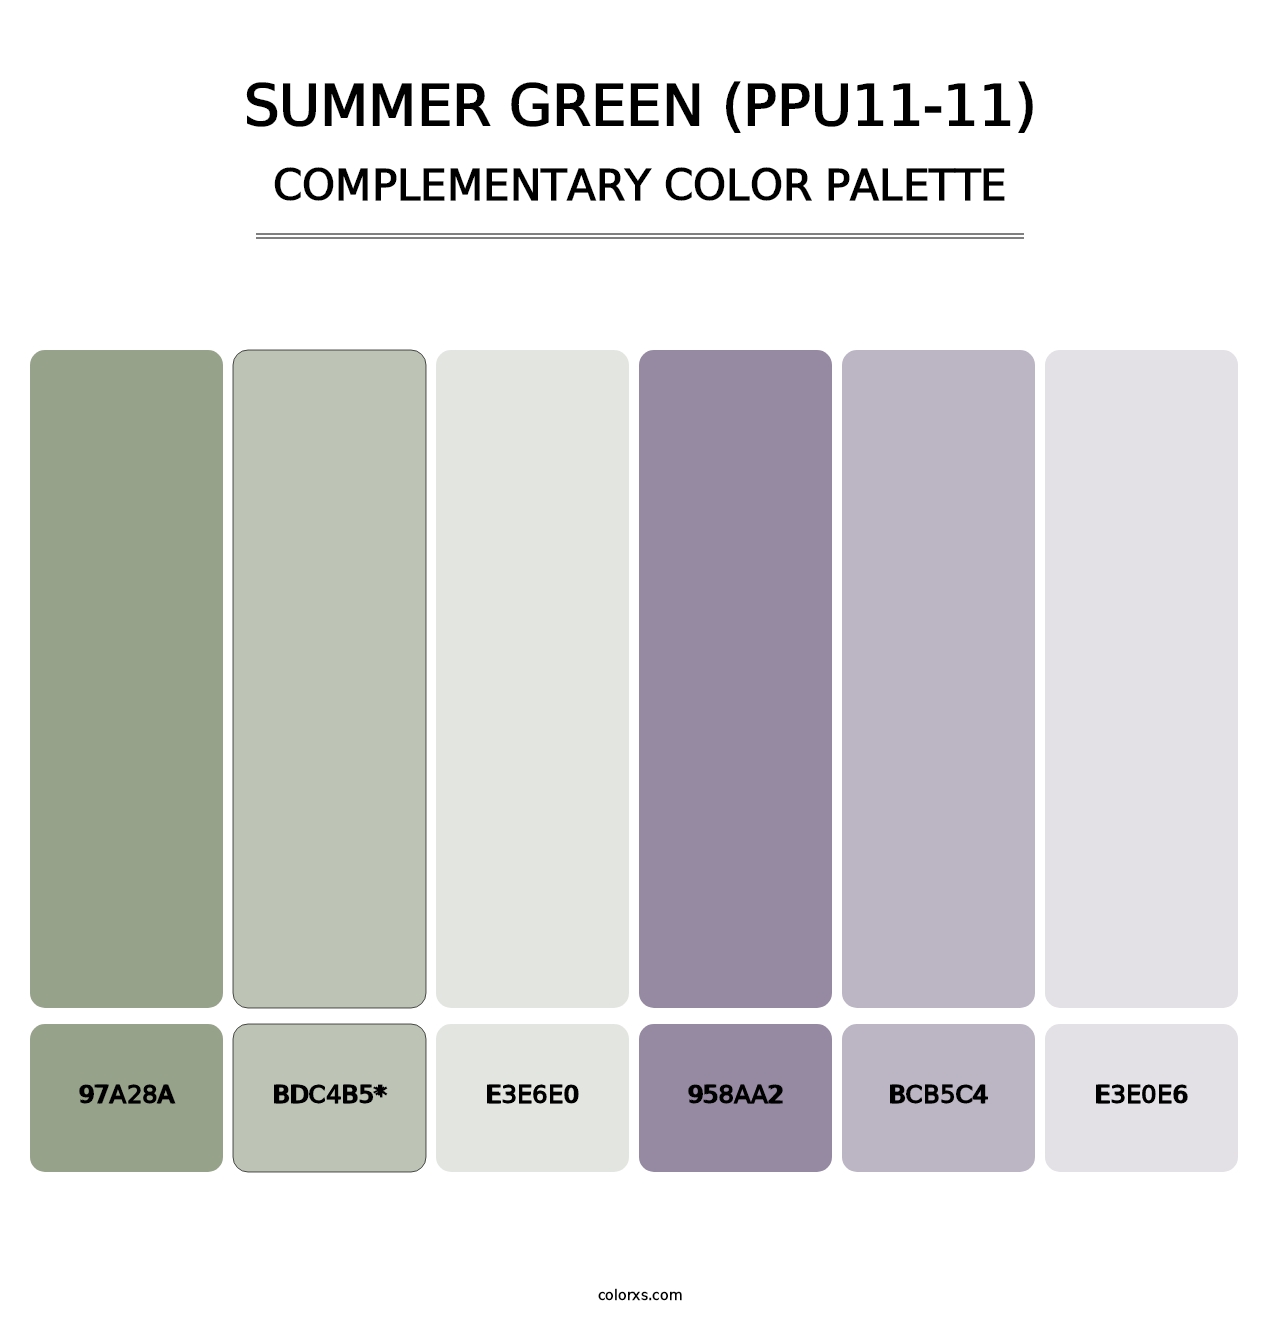 Summer Green (PPU11-11) - Complementary Color Palette